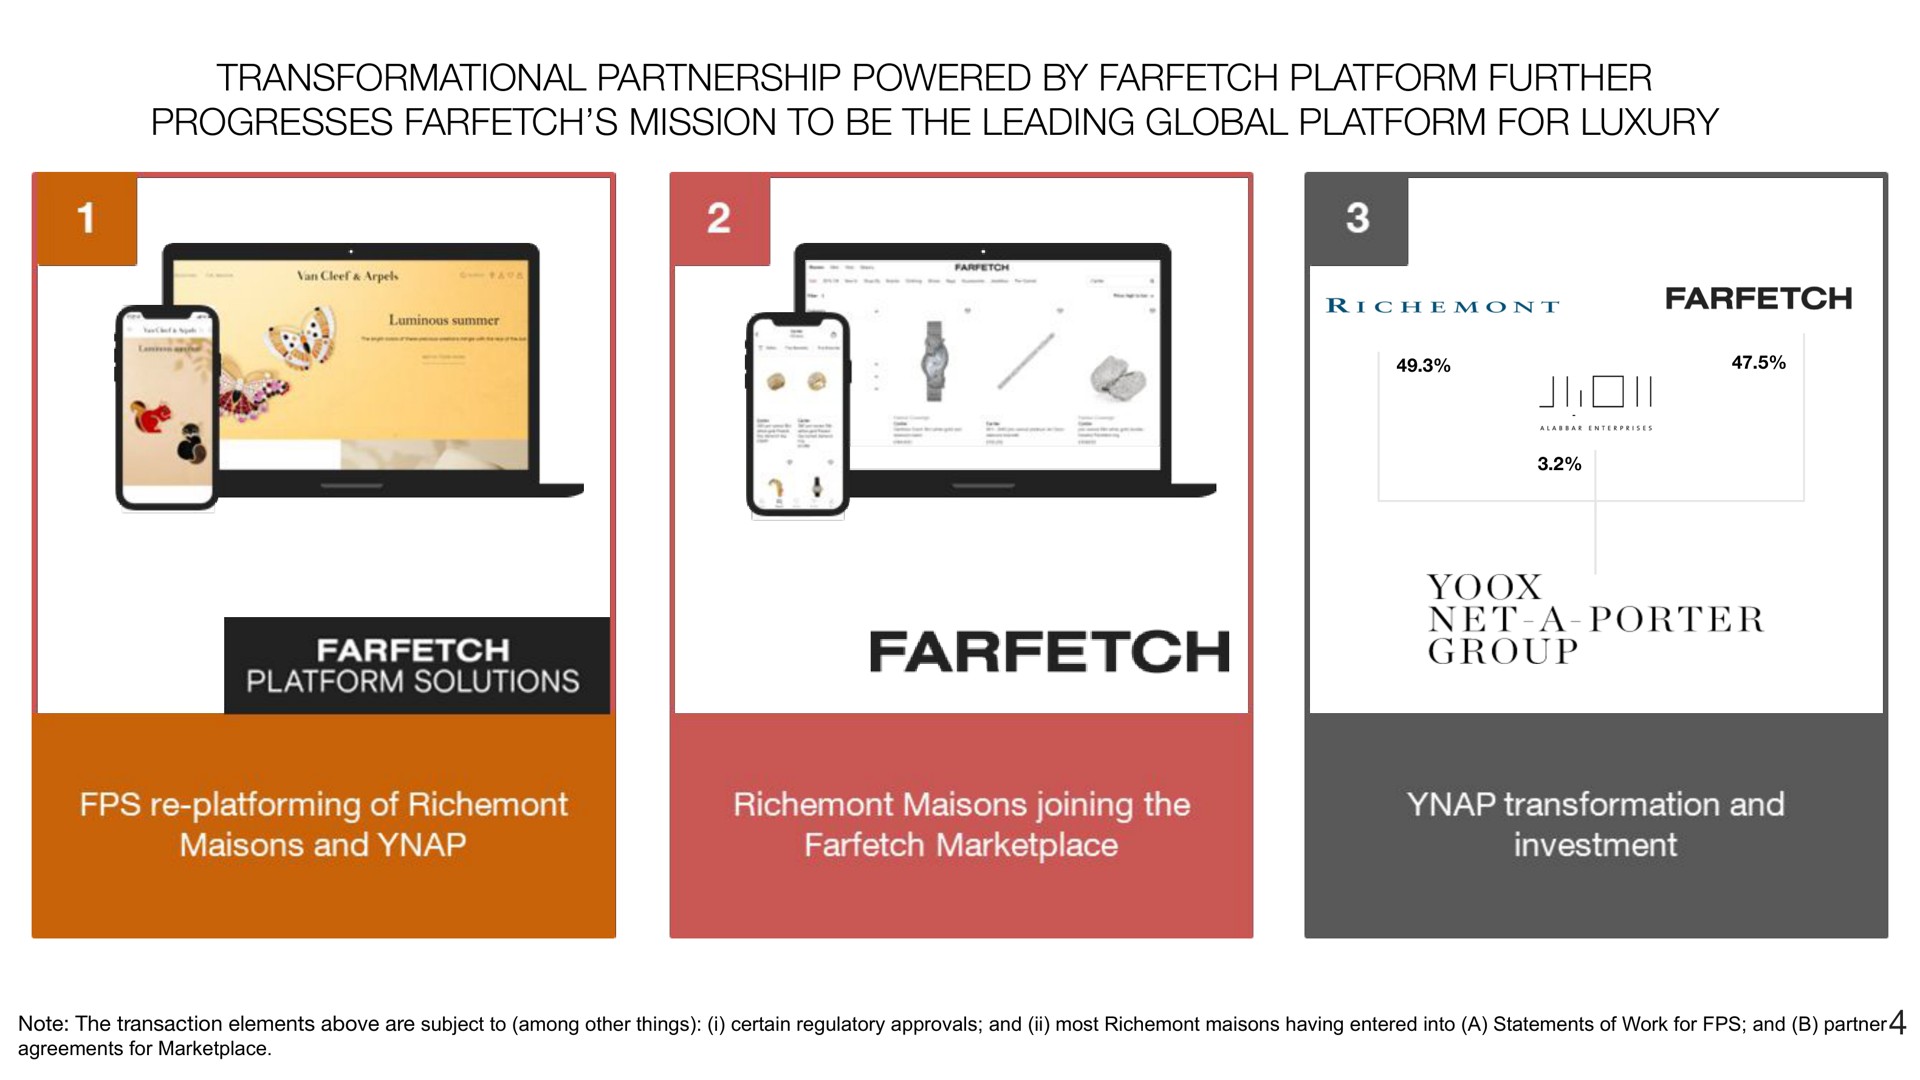 partnership powered by platform further progresses mission to be the leading global platform for luxury group | Farfetch